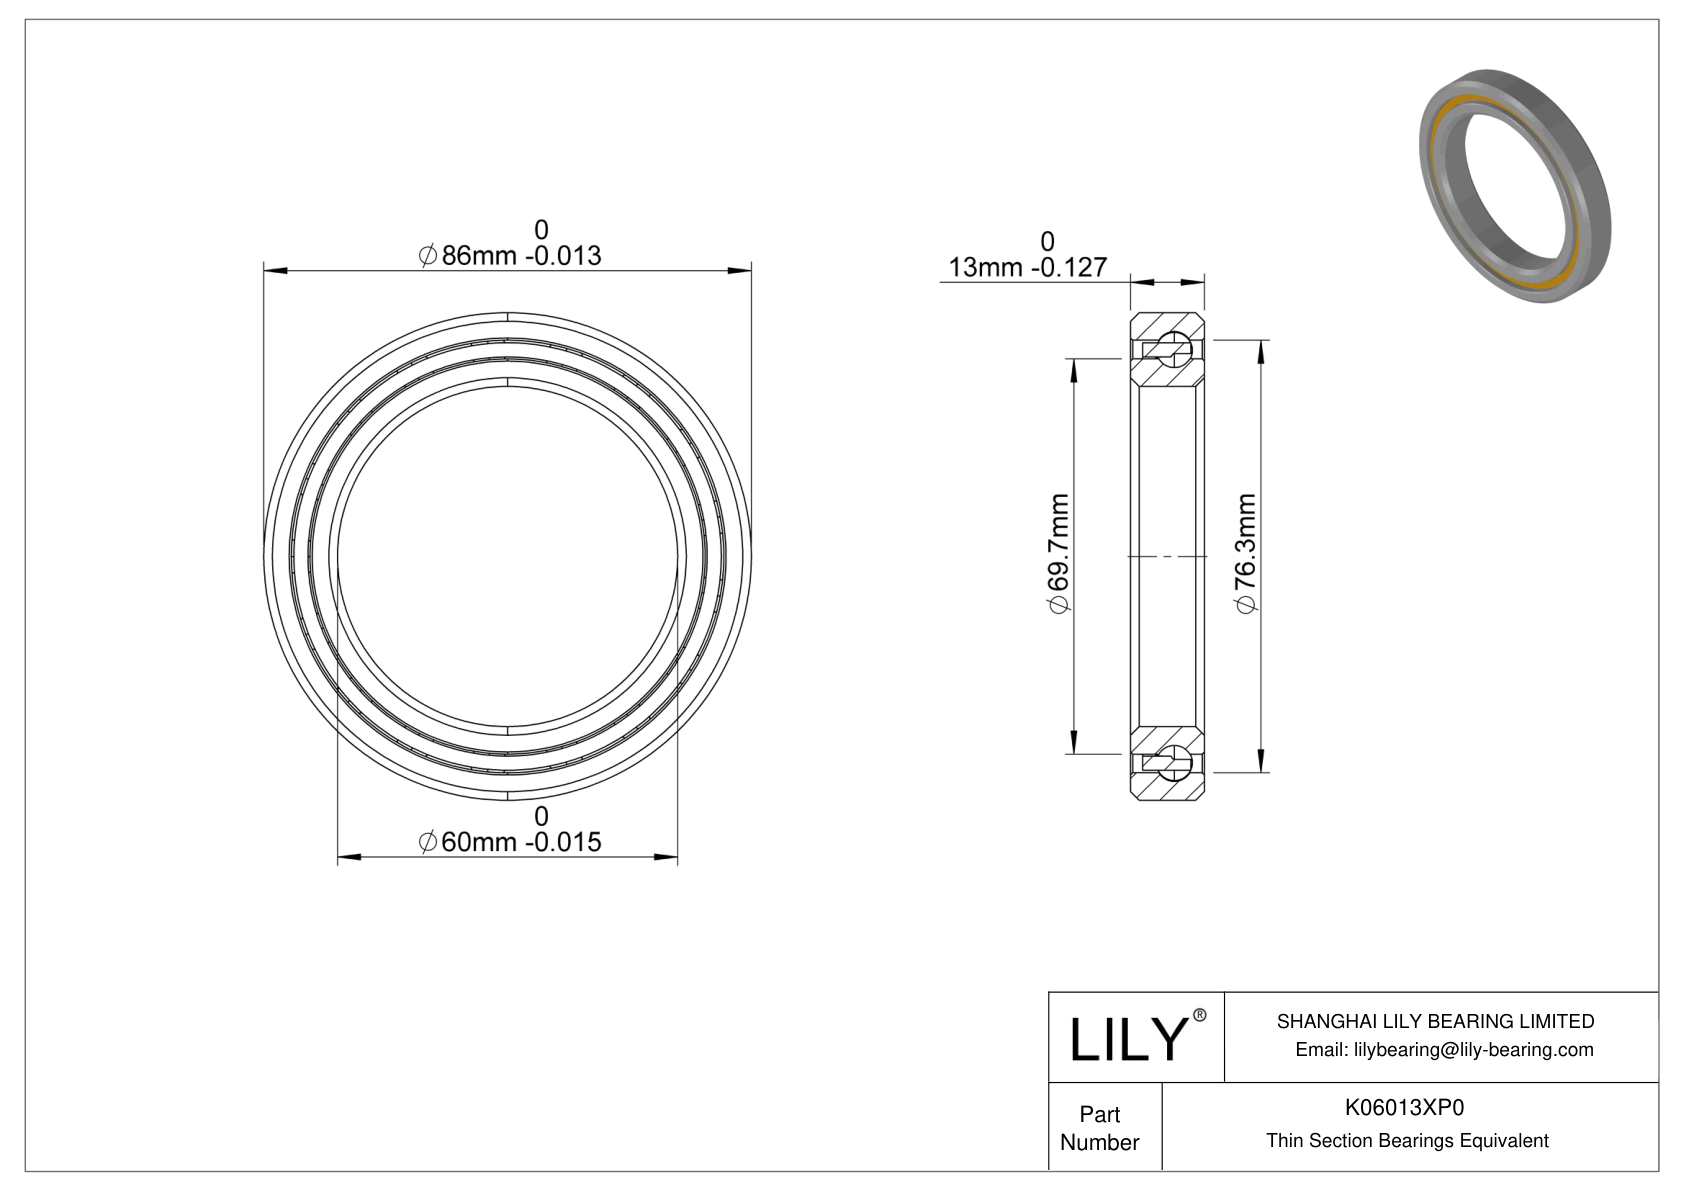 K06013XP0 Constant Section (CS) Bearings cad drawing